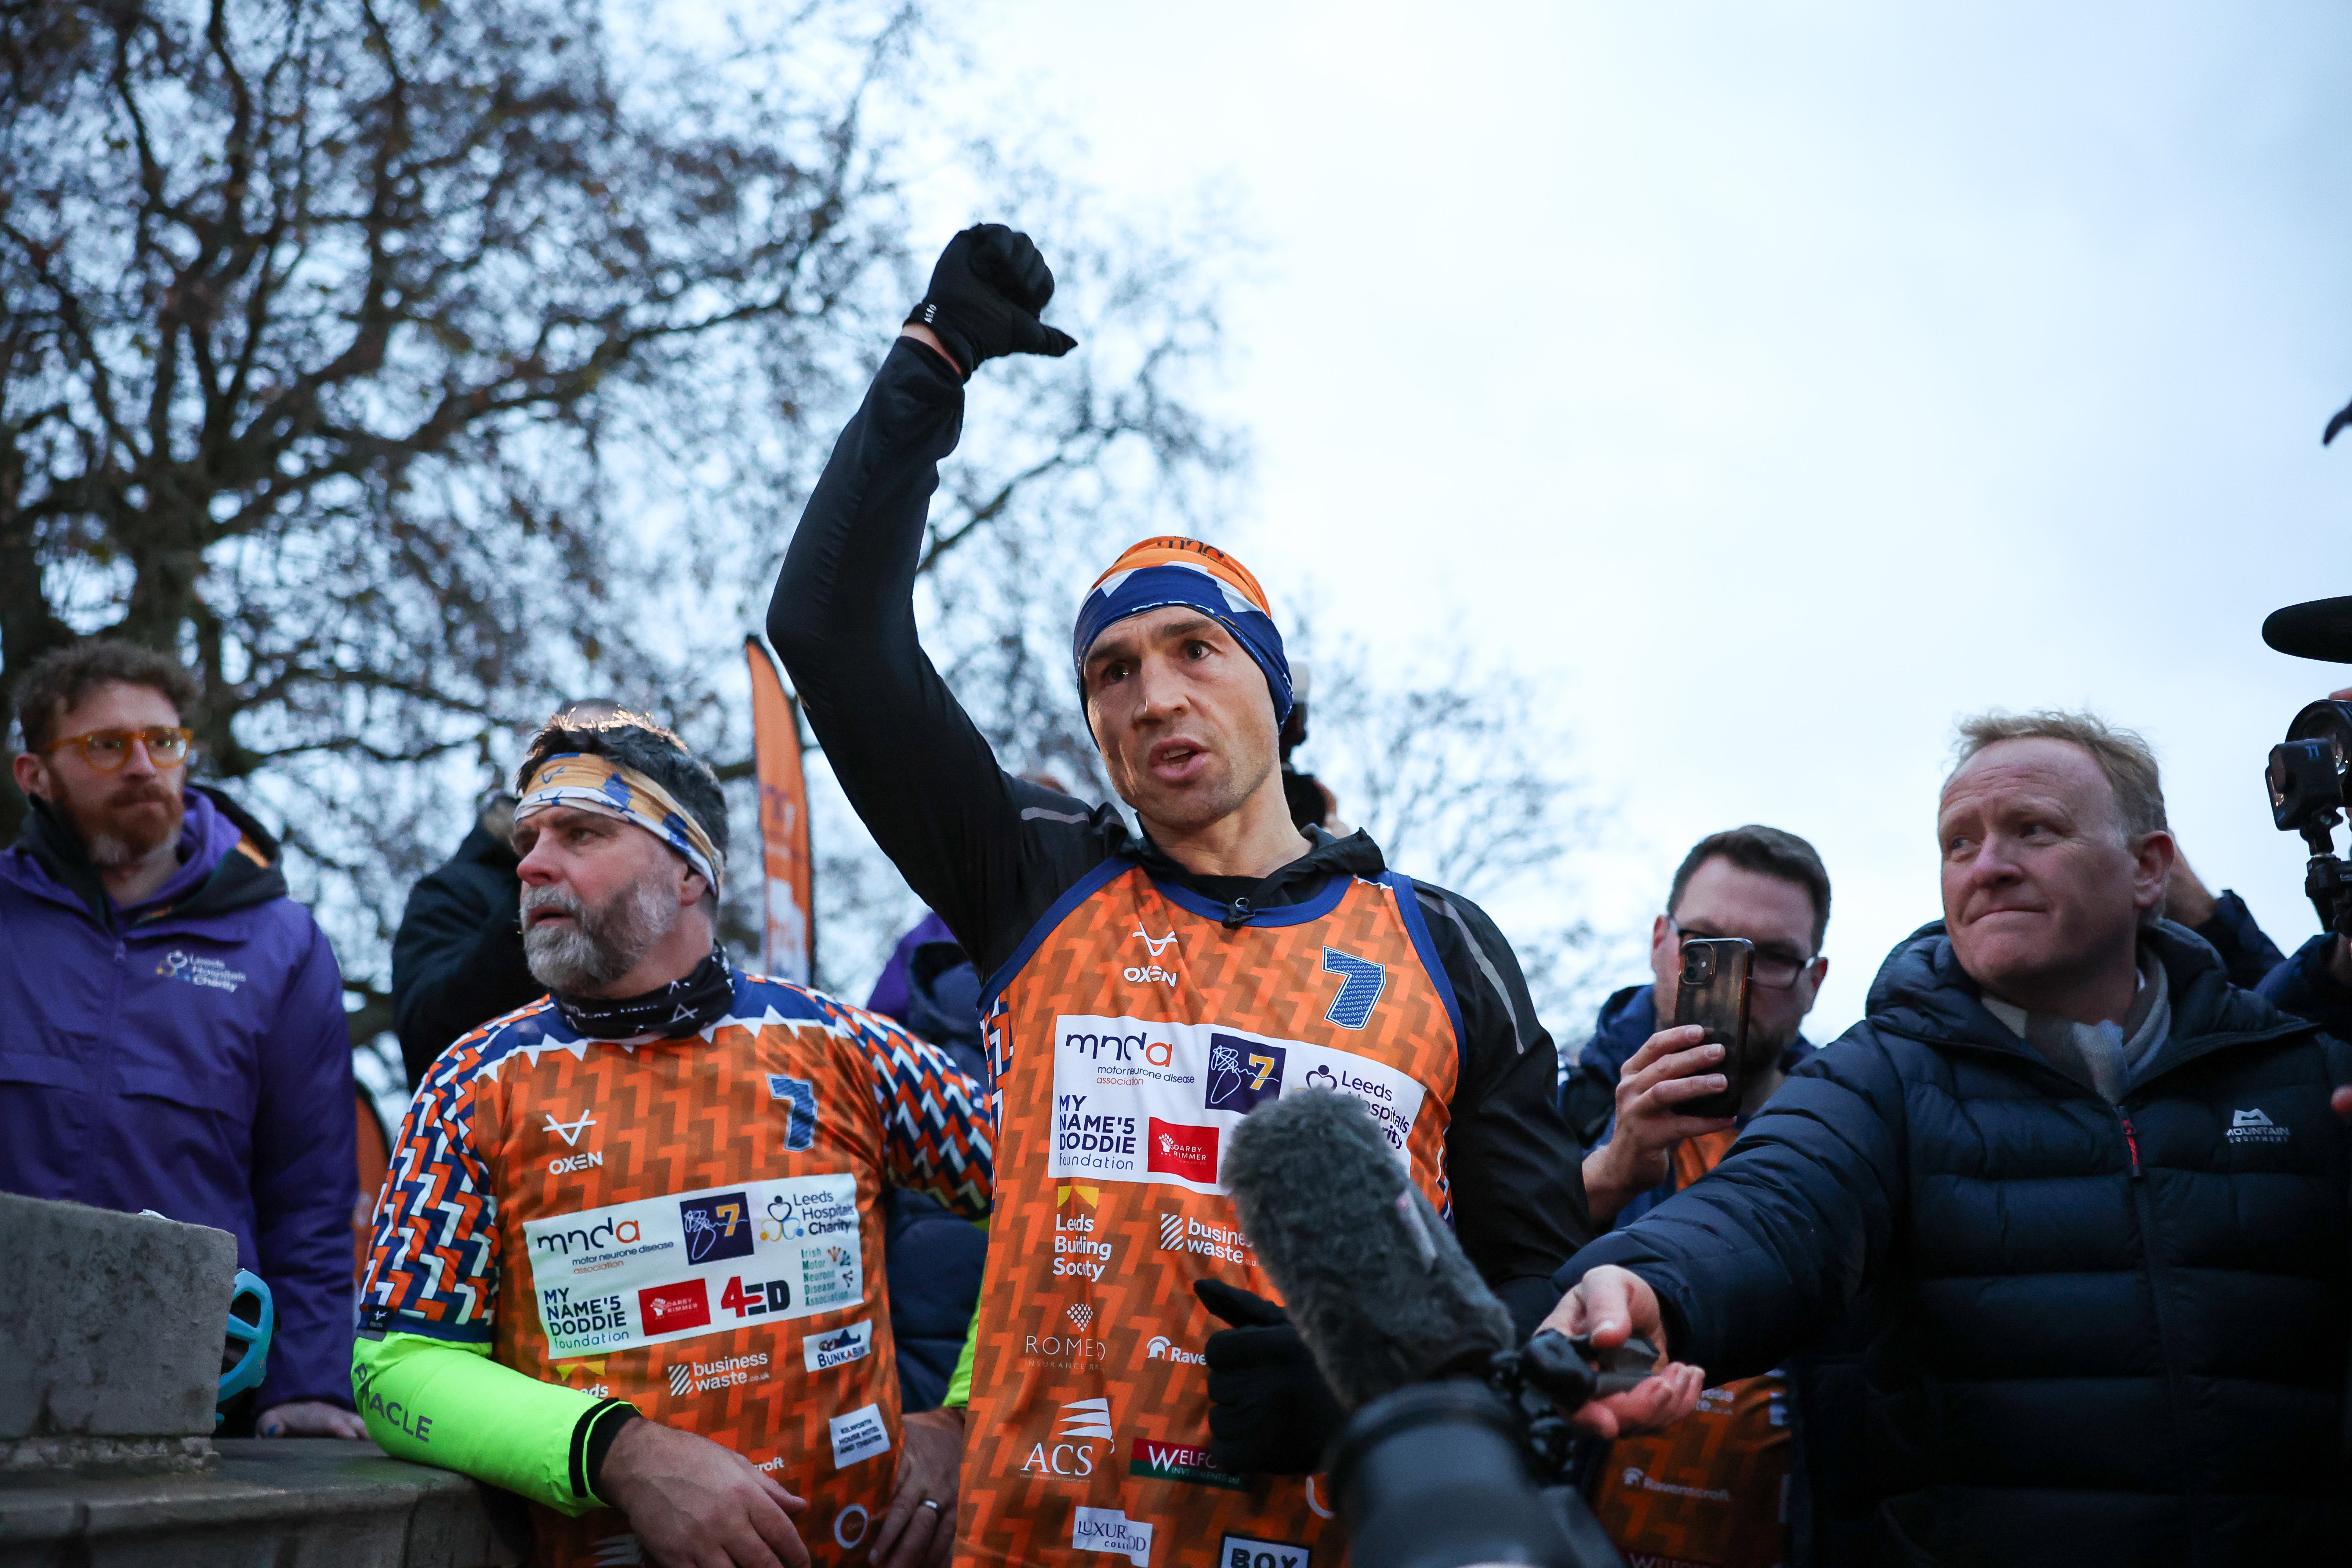 Kevin Sinfield ran seven ultra marathons in seven days to raise money for charity